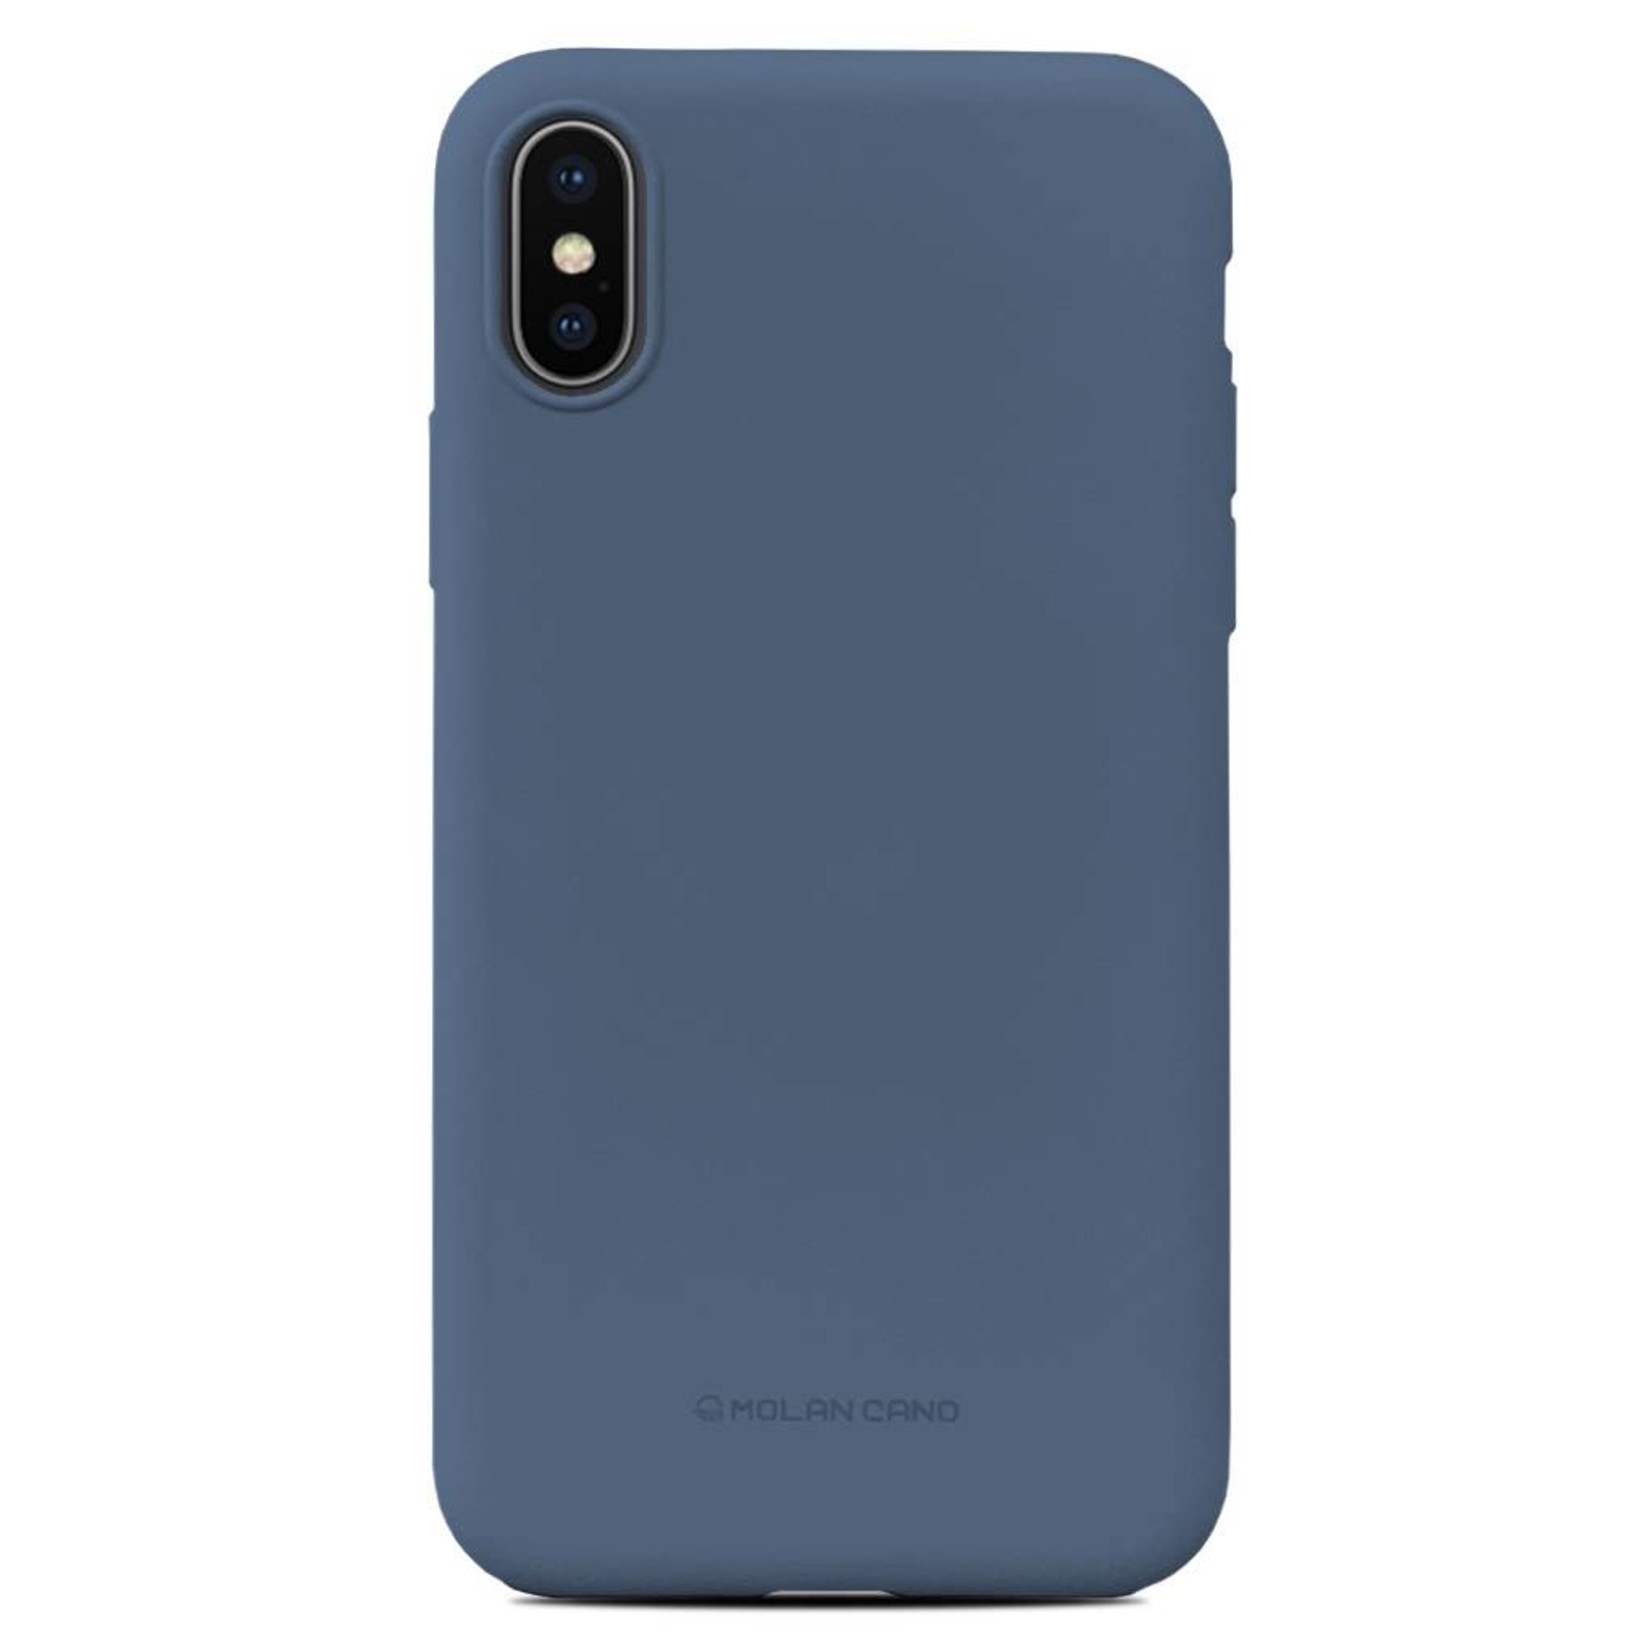 Molan Cano Slim Silicone Case for iPhone XS Max